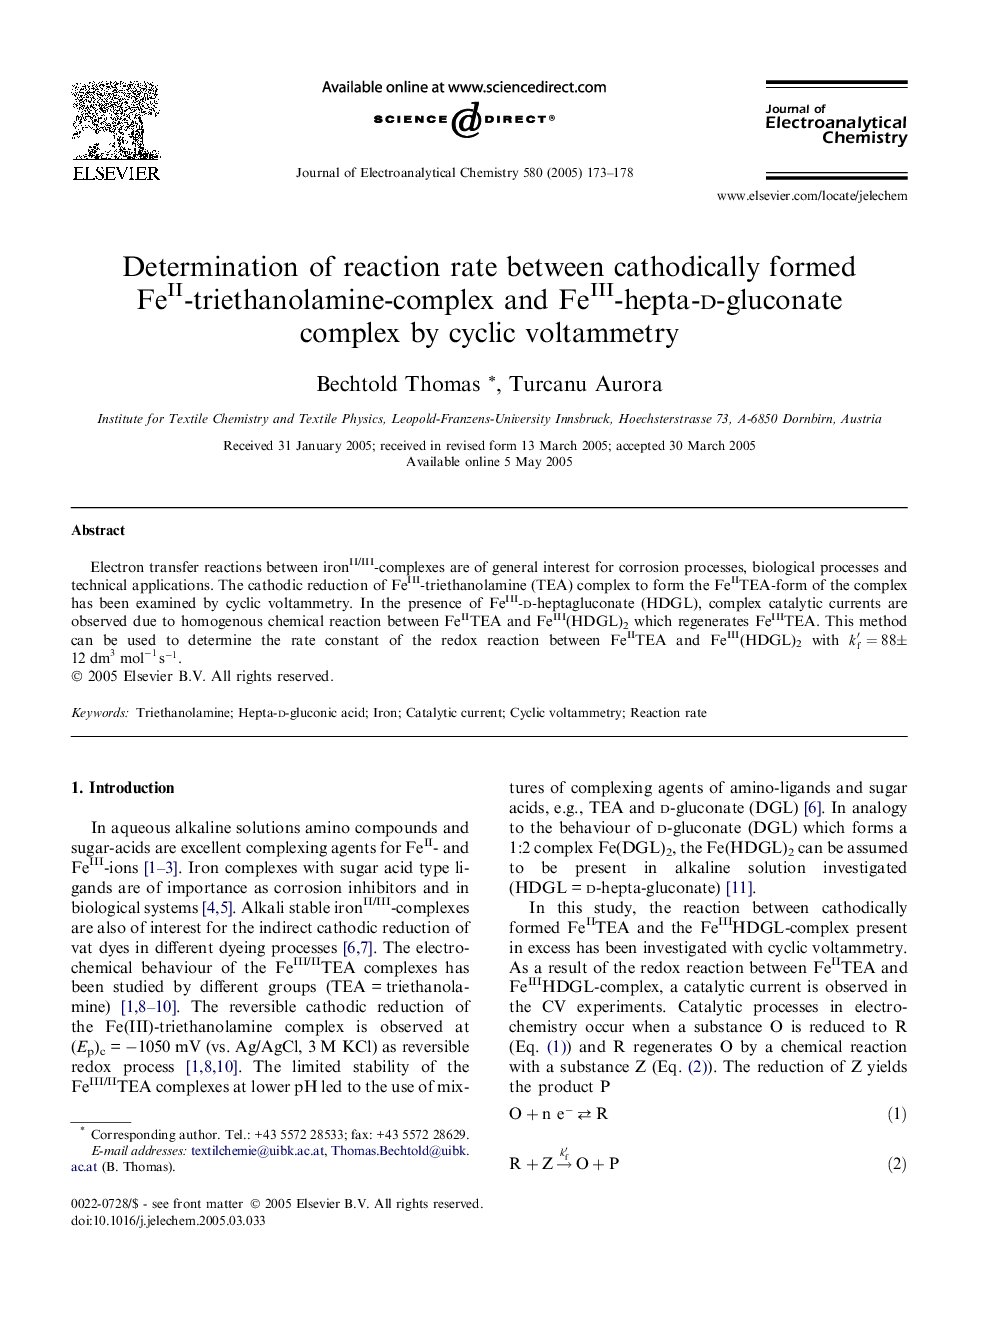 Determination of reaction rate between cathodically formed FeII-triethanolamine-complex and FeIII-hepta-d-gluconate complex by cyclic voltammetry